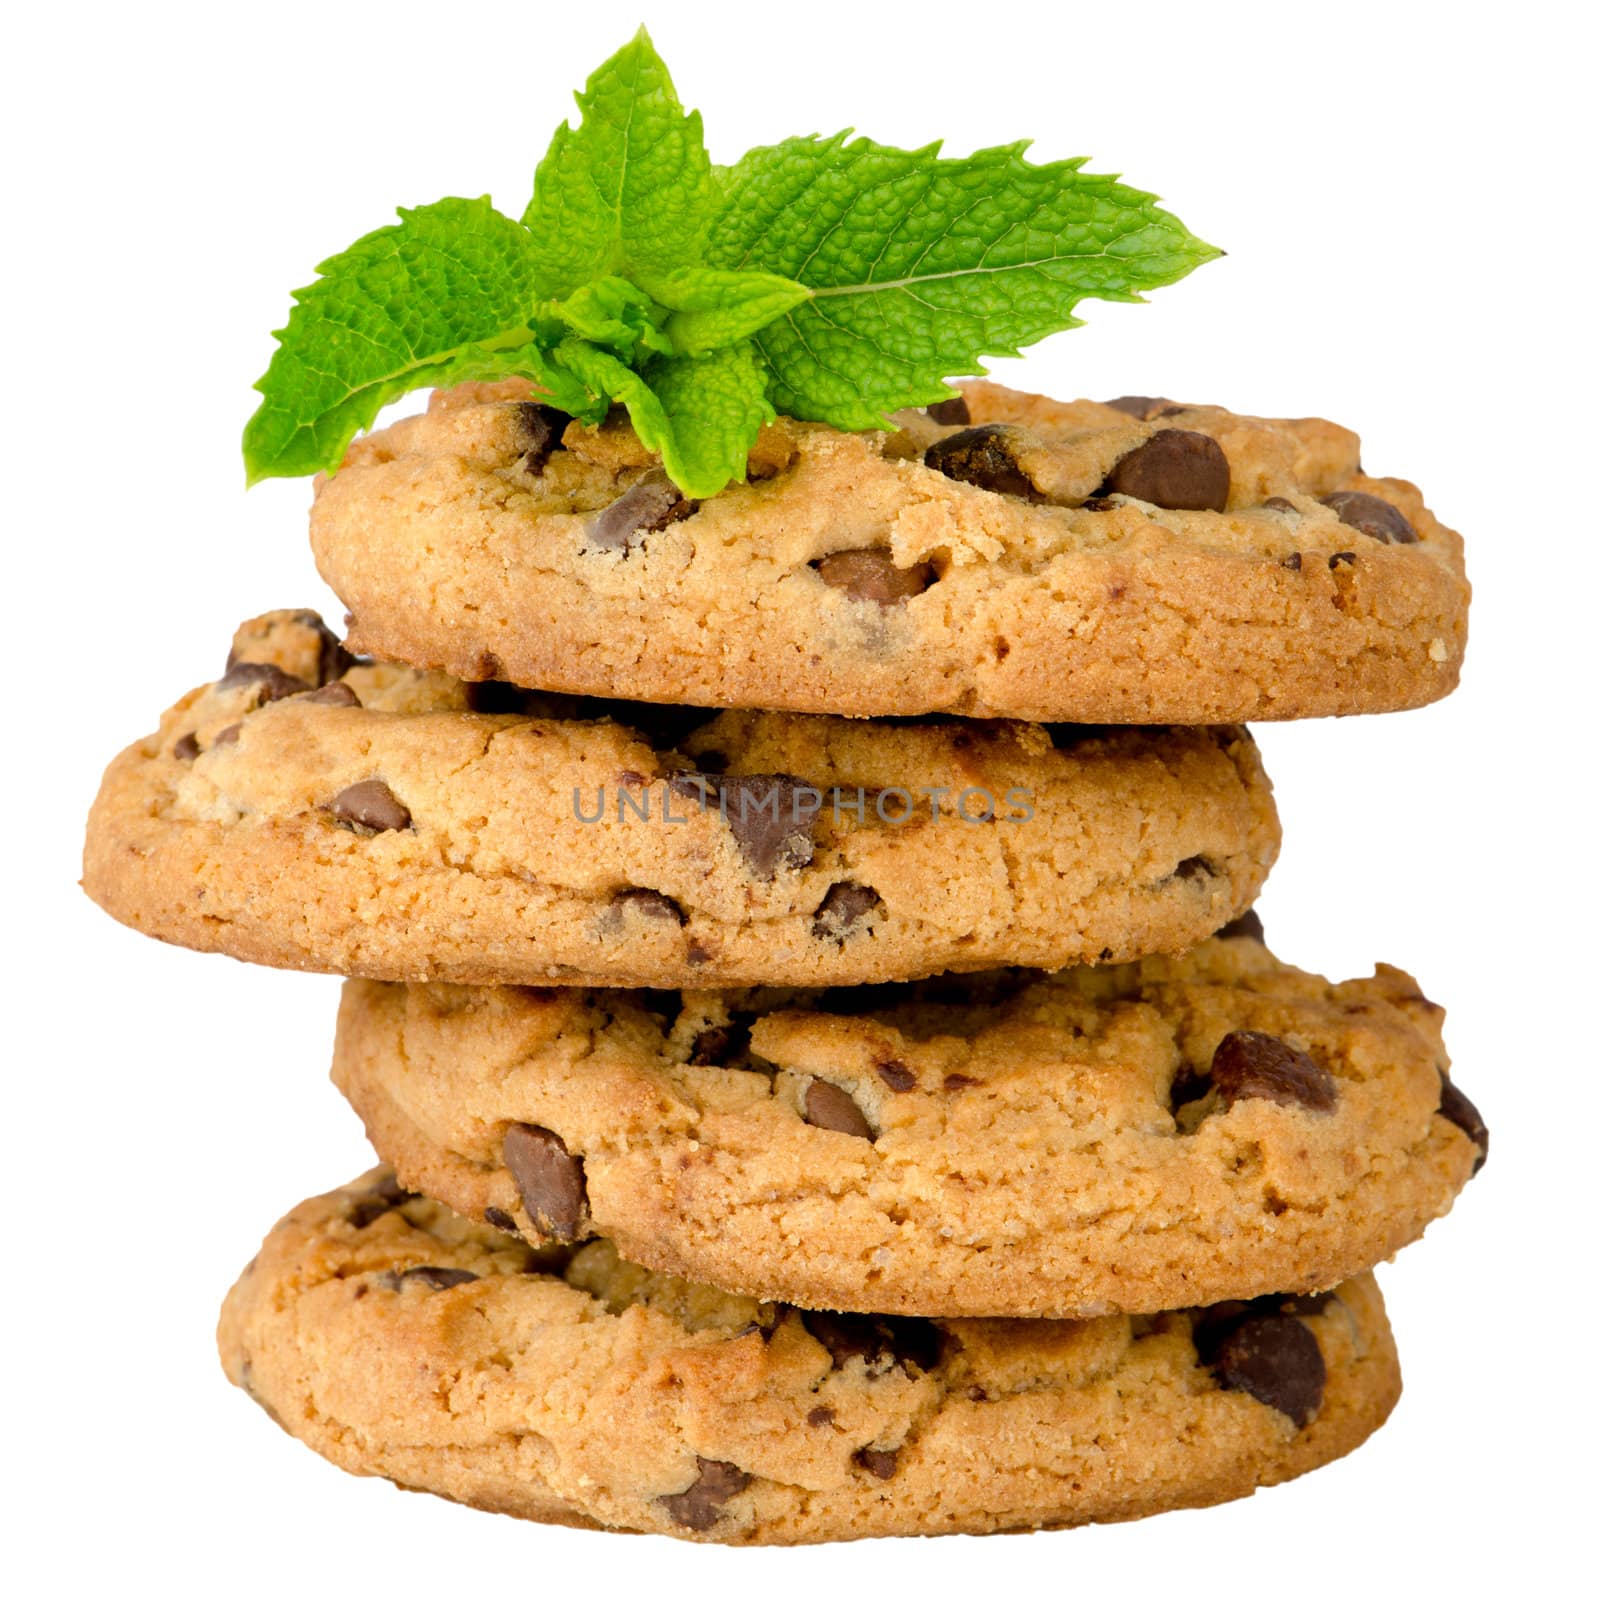 Chocolate cookies with mint leaves isolated on white background.